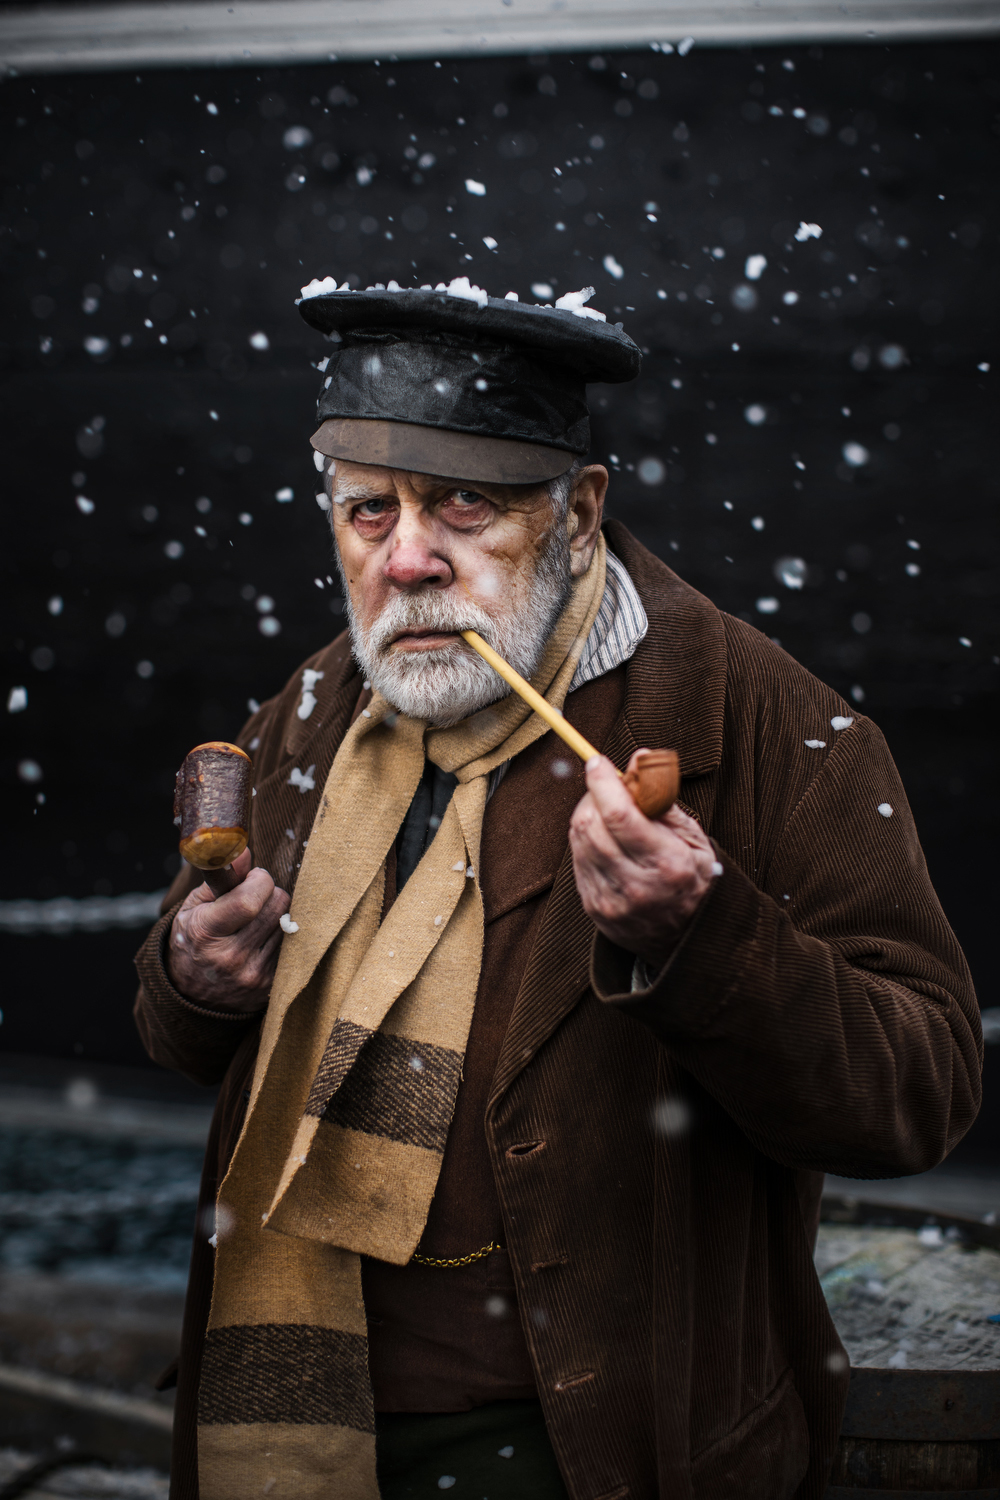 The Ragged Victorians at the ss Great Britain during their Victorian Christmas weekend, 8 December 2018. Photo by Adam Gasson / adamgasson.com